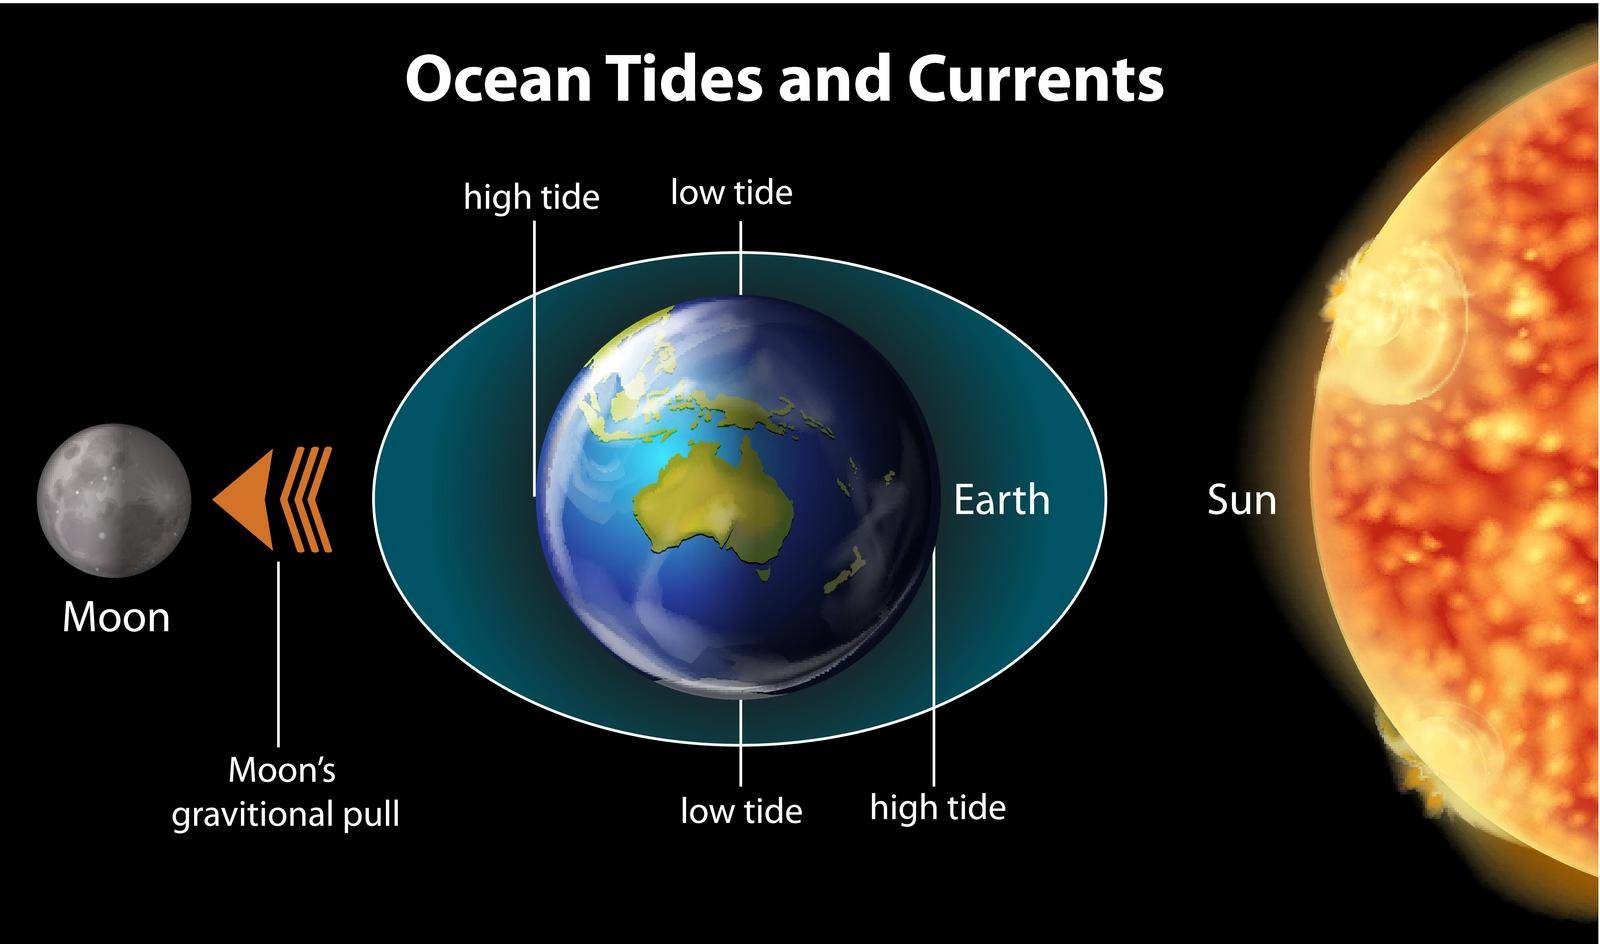 Image showing the Ocean Tides and Currents